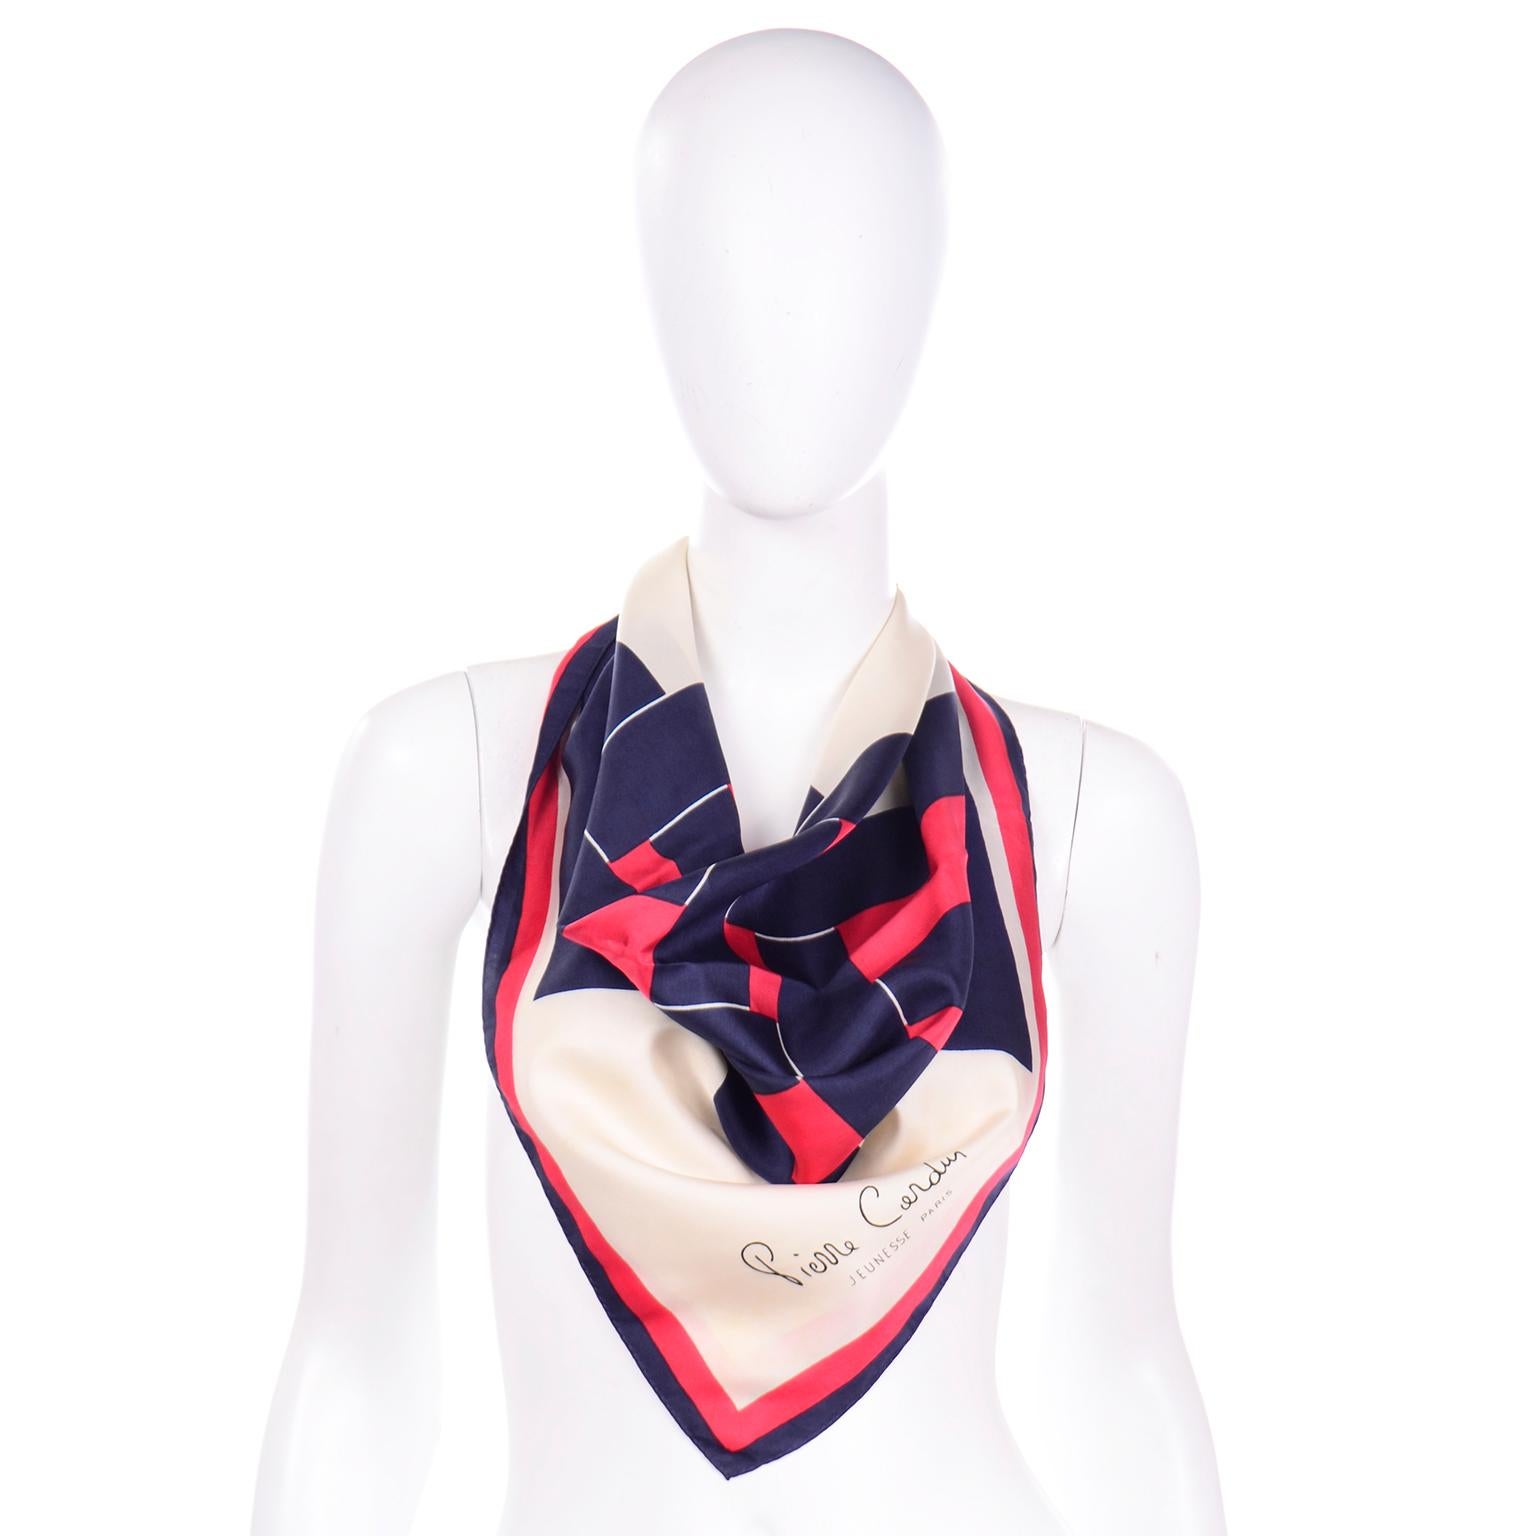 This is a beautiful vintage Pierre Cardin silk scarf in a color block style print in shades of  navy blue, red, and ivory throughout. The hem of this scarf is hand rolled and it is 100% Silk. 

30